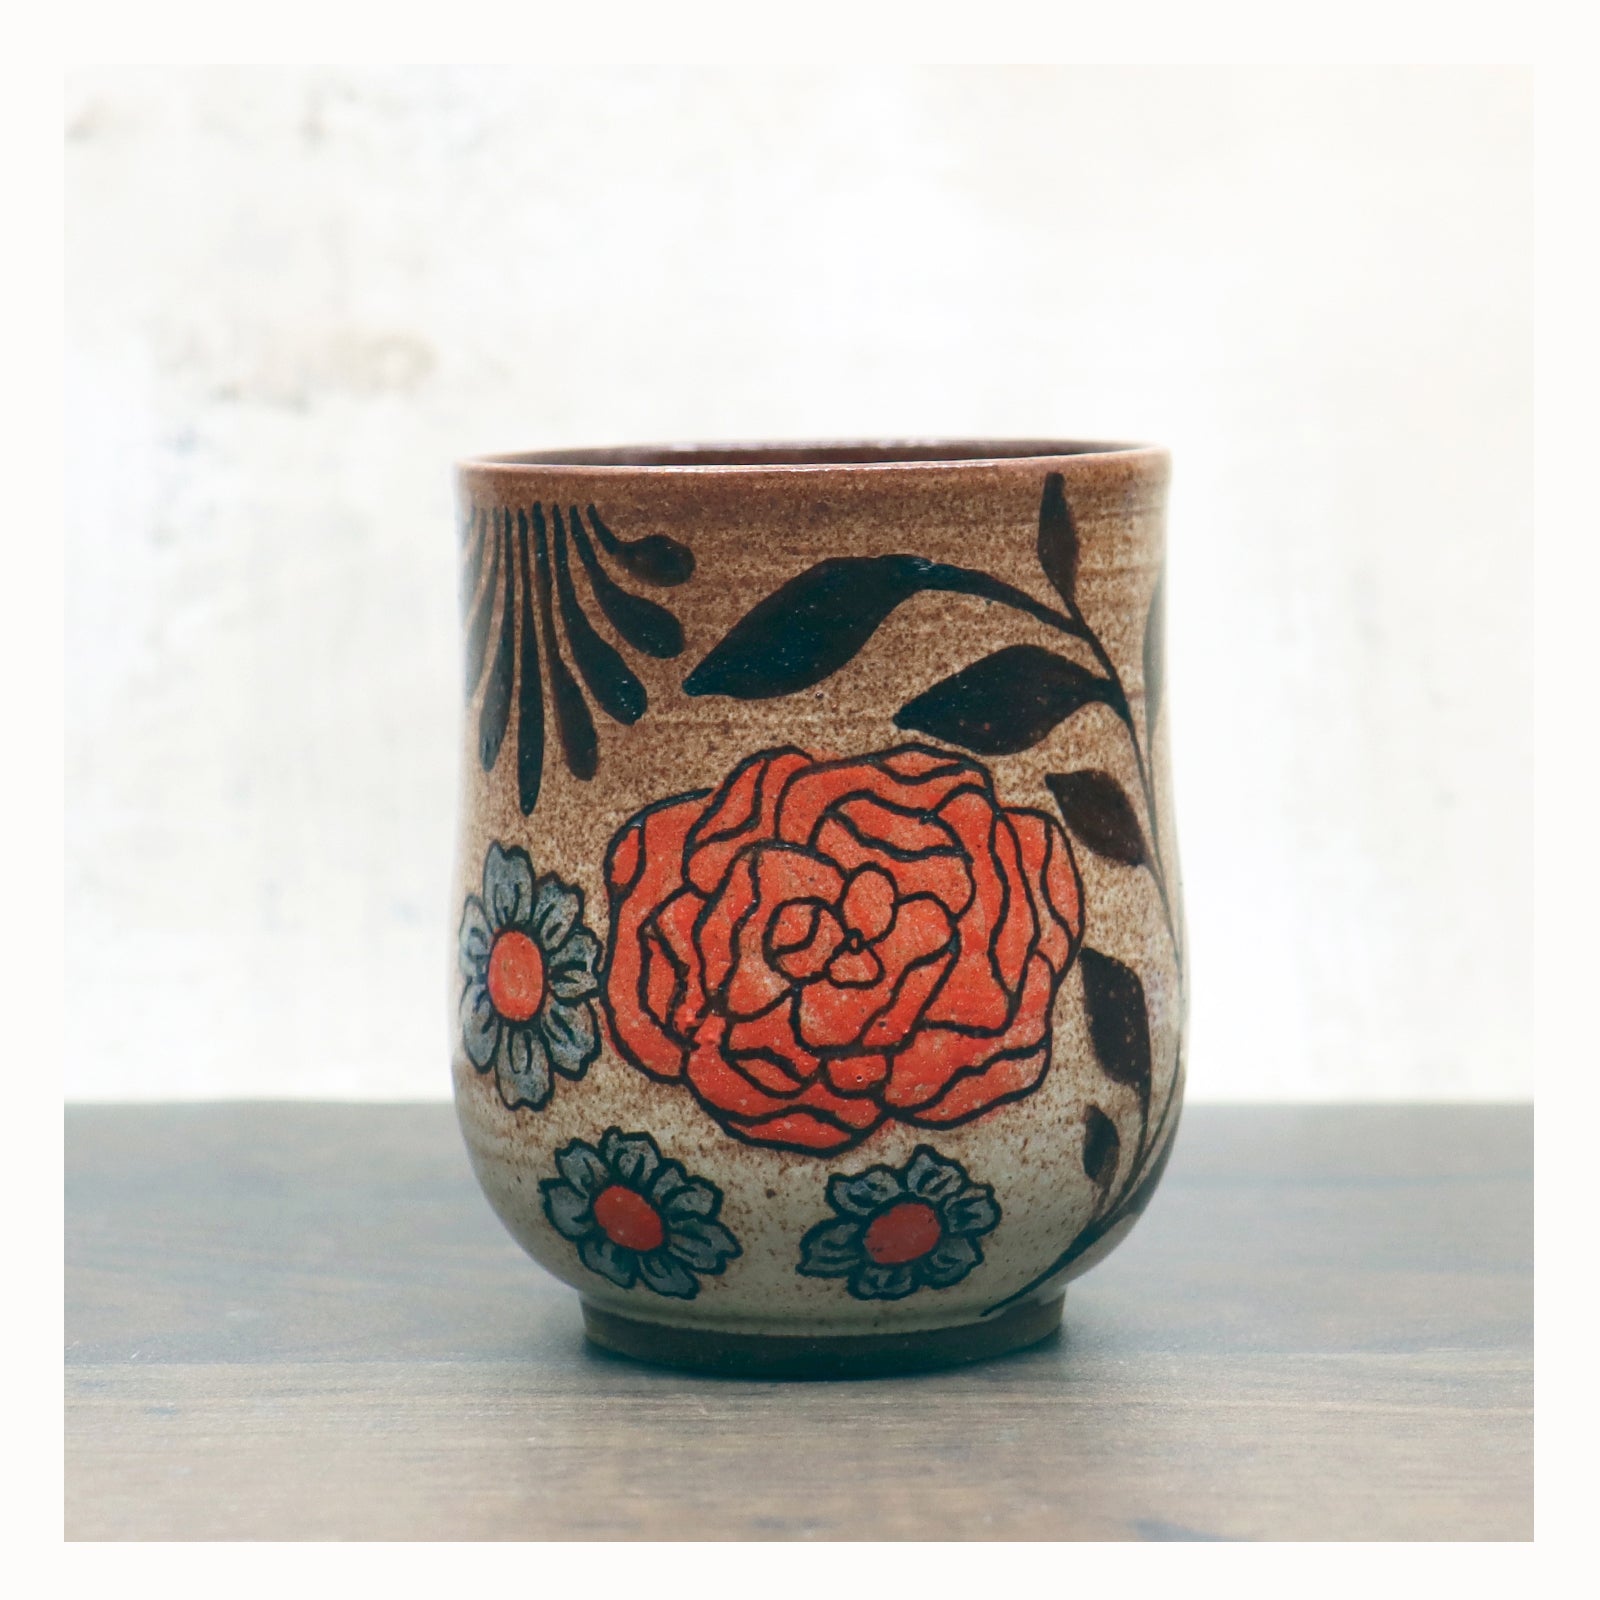 Off Menu Pots, handmade functional ceramics with botanical and decorative illustrations, at Lark & Key. Shop online or locally by appointment (Charlotte NC).